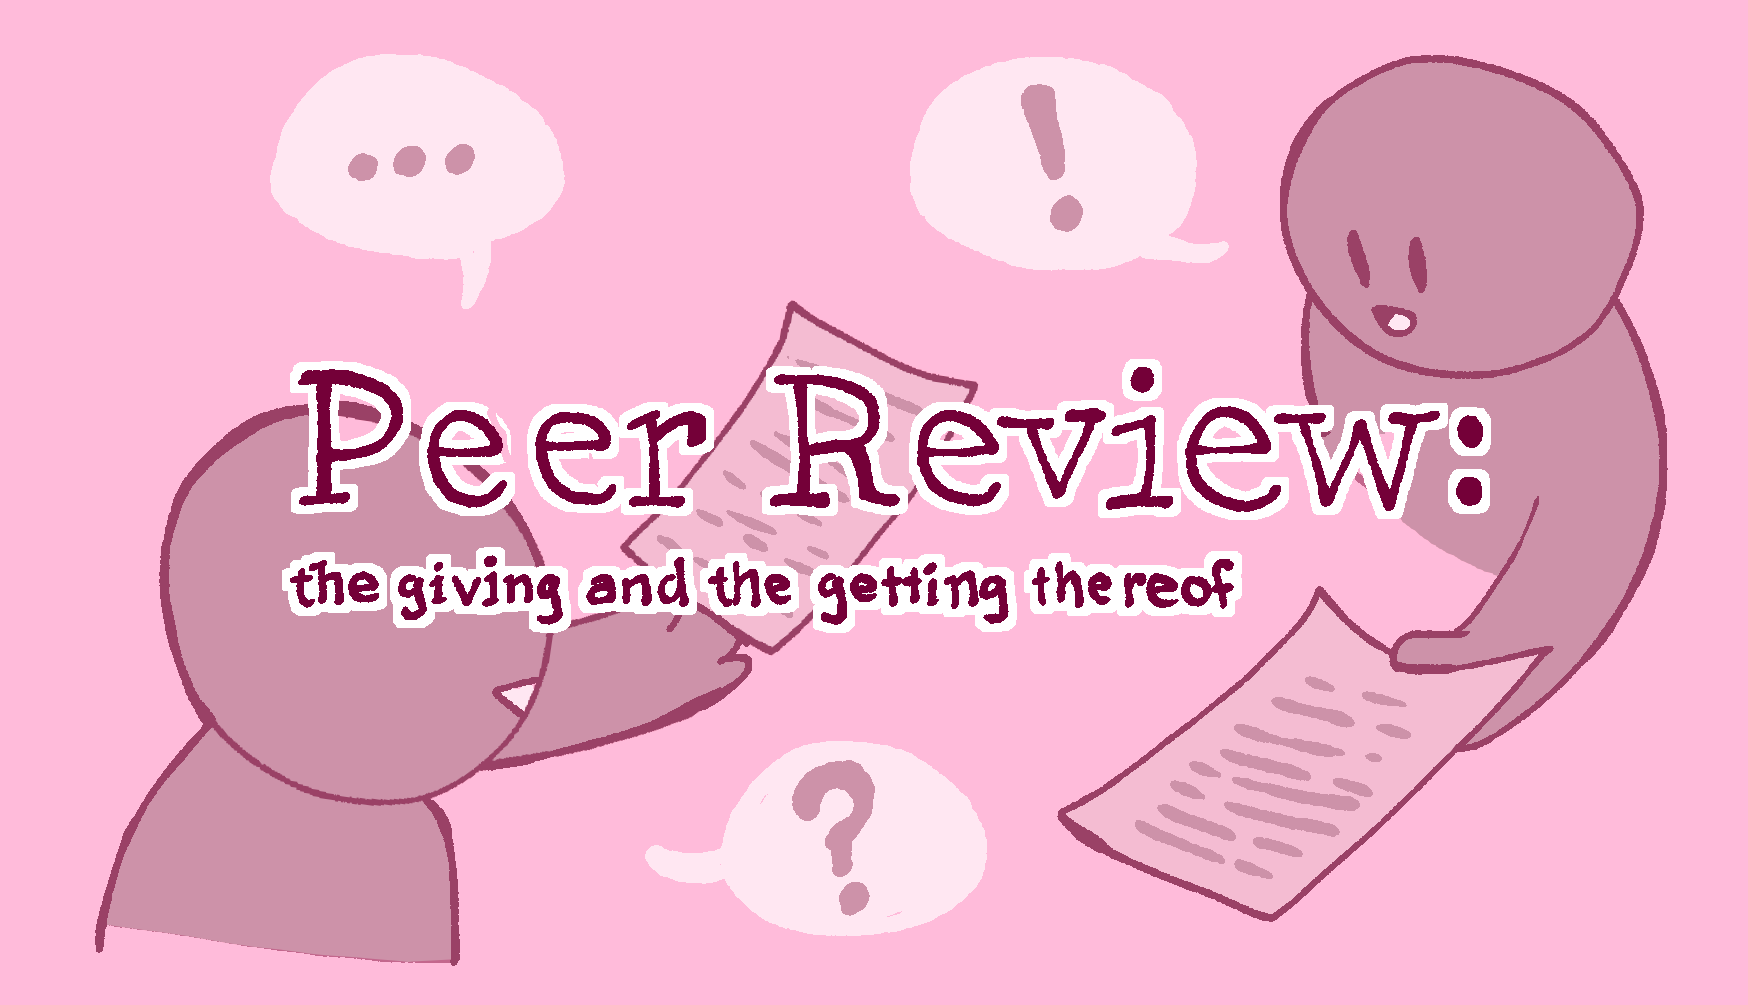 PEER REVIEW: the giving and the getting thereof Image